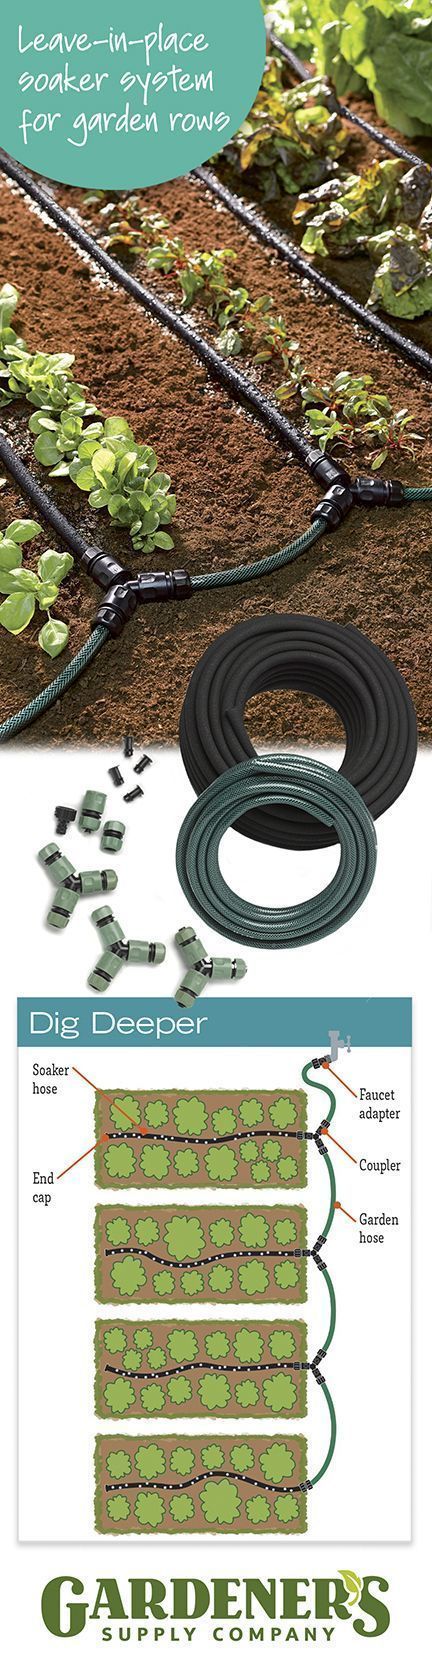 Customizable Vegetable Garden Row Soaker Hose System — Complete Kit Installs in Minutes, Waters Plants All Season!